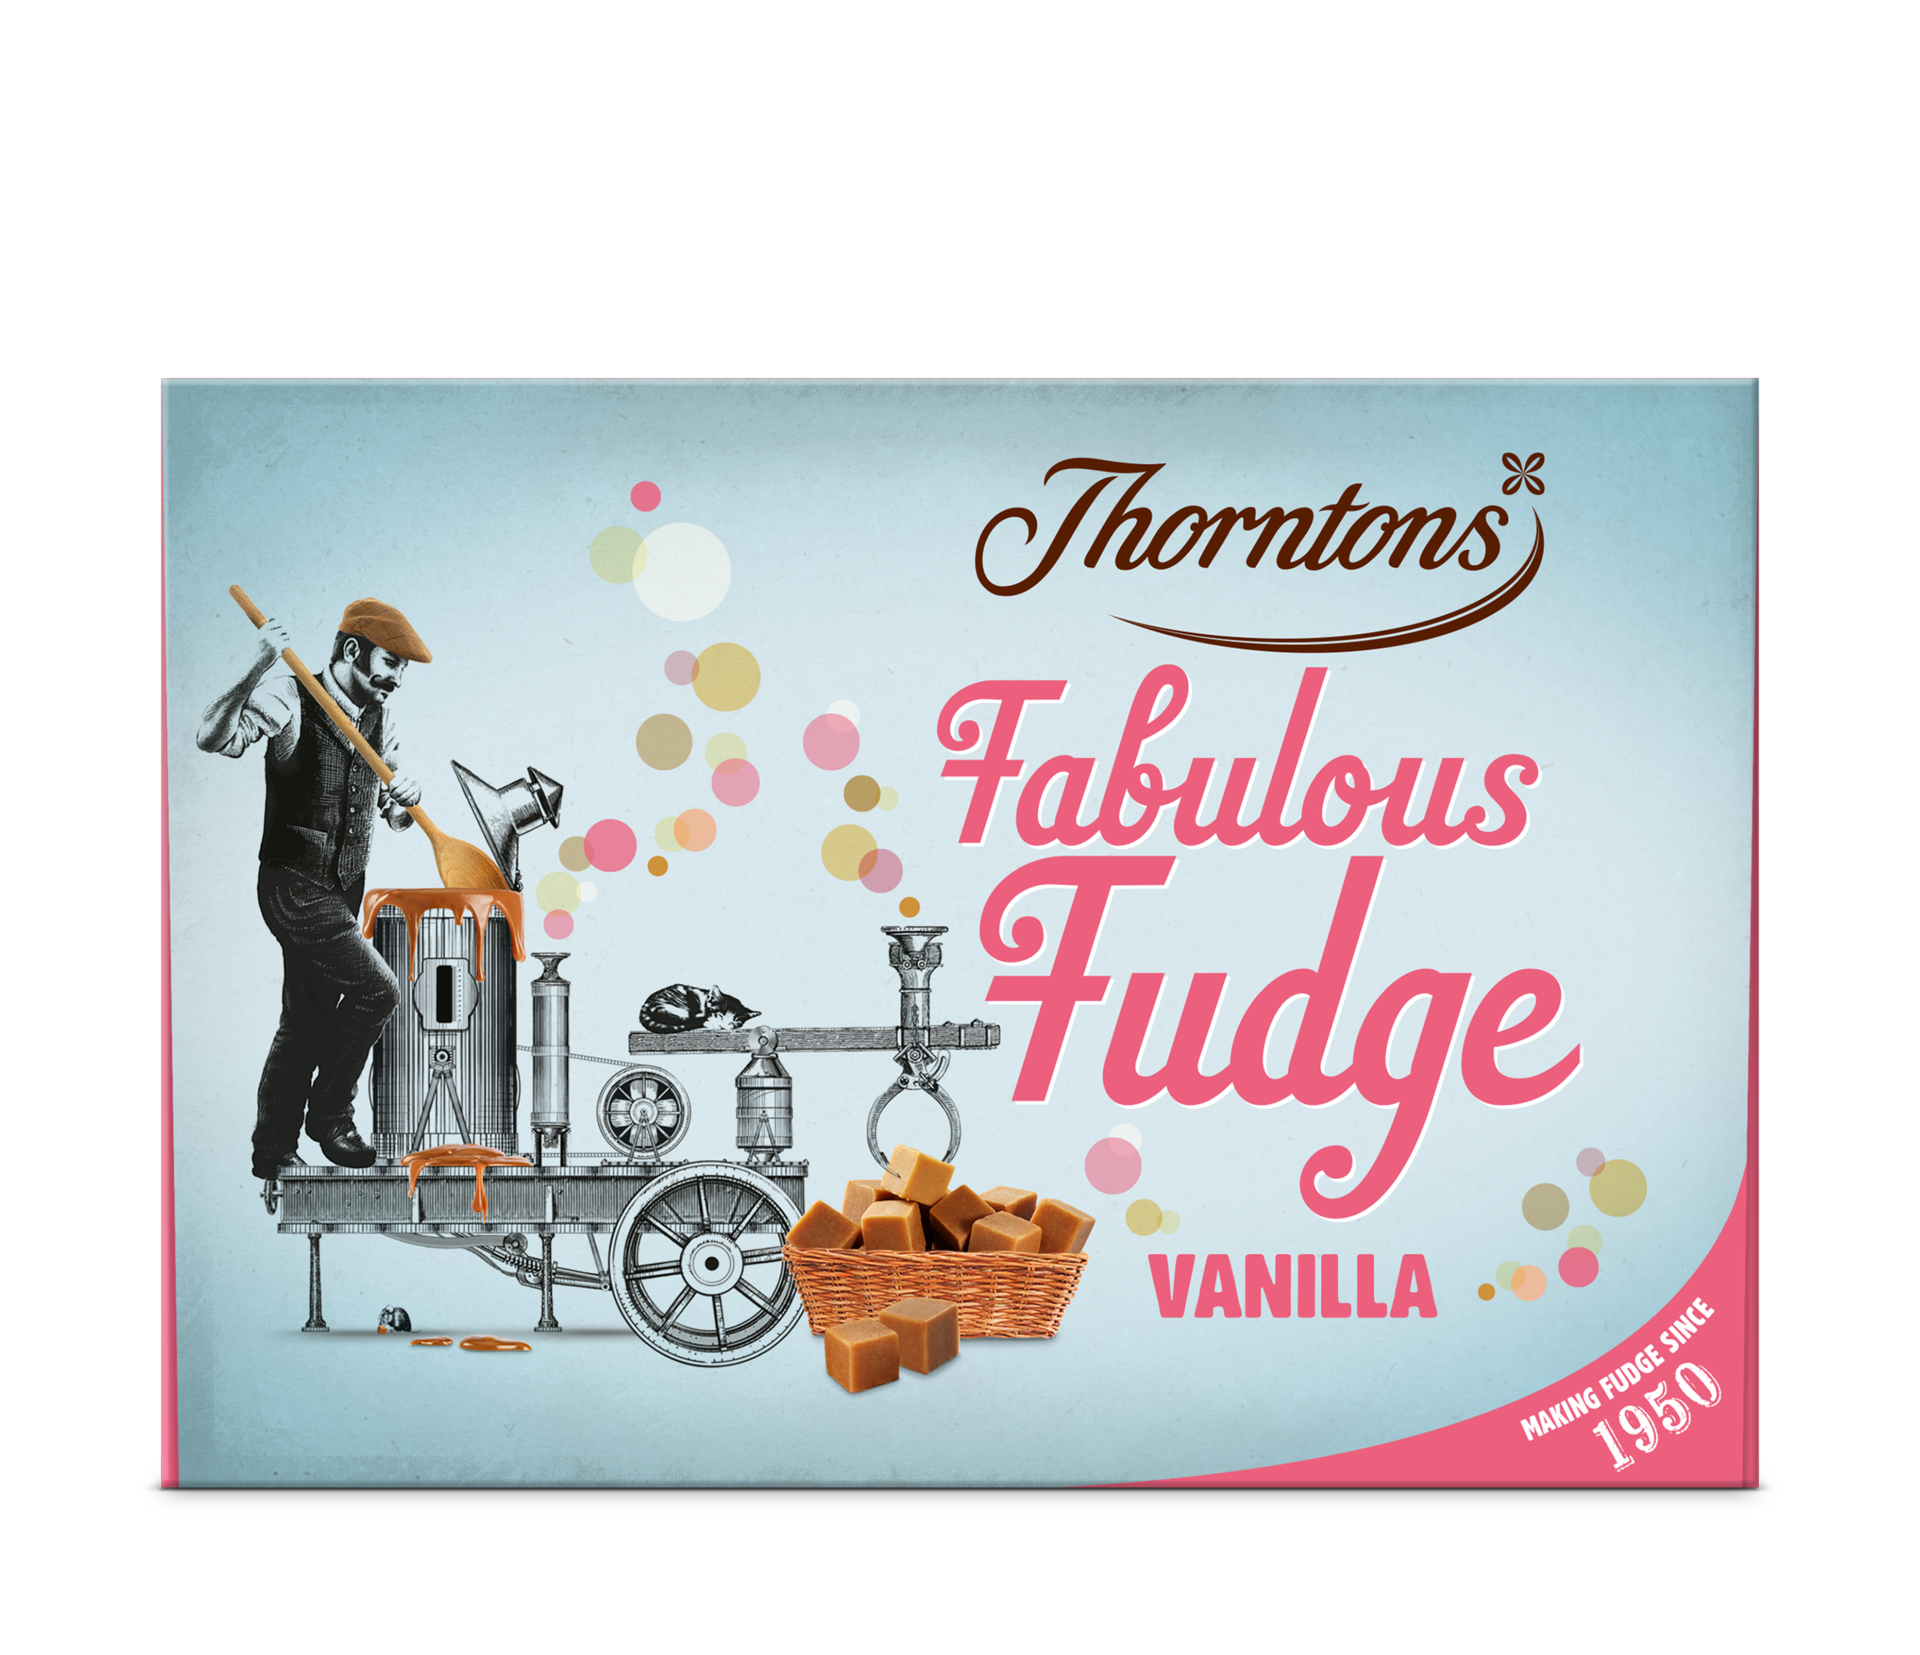 https://www.thorntons.com/medias/sys_master/images/h83/h5b/8916766130206/77230996_main/77230996-main.png?resize=xs-s-xs